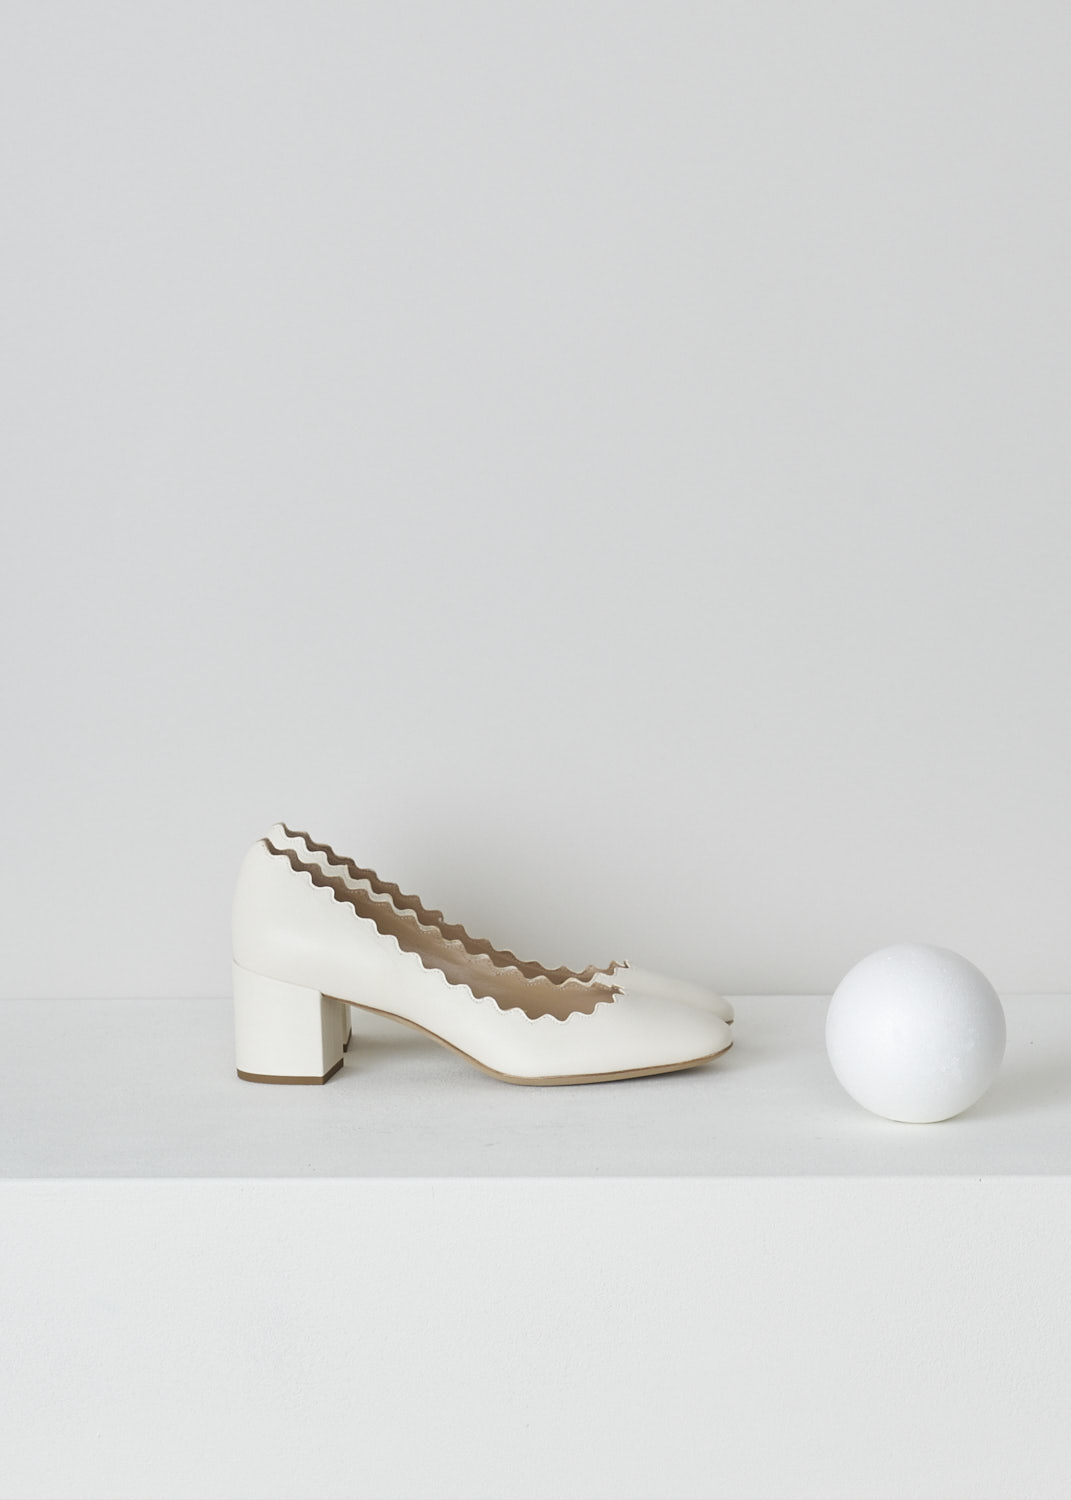 CHLOÃ‰, SCALLOPED LAUREN PUMPS IN CLOUDY WHITE, CHC16A23075121_CLOUDY_WHITE,  White, Side, White leather Lauren pumps featuring a sturdy block heel, round toe vamp and a scalloped top-line.
